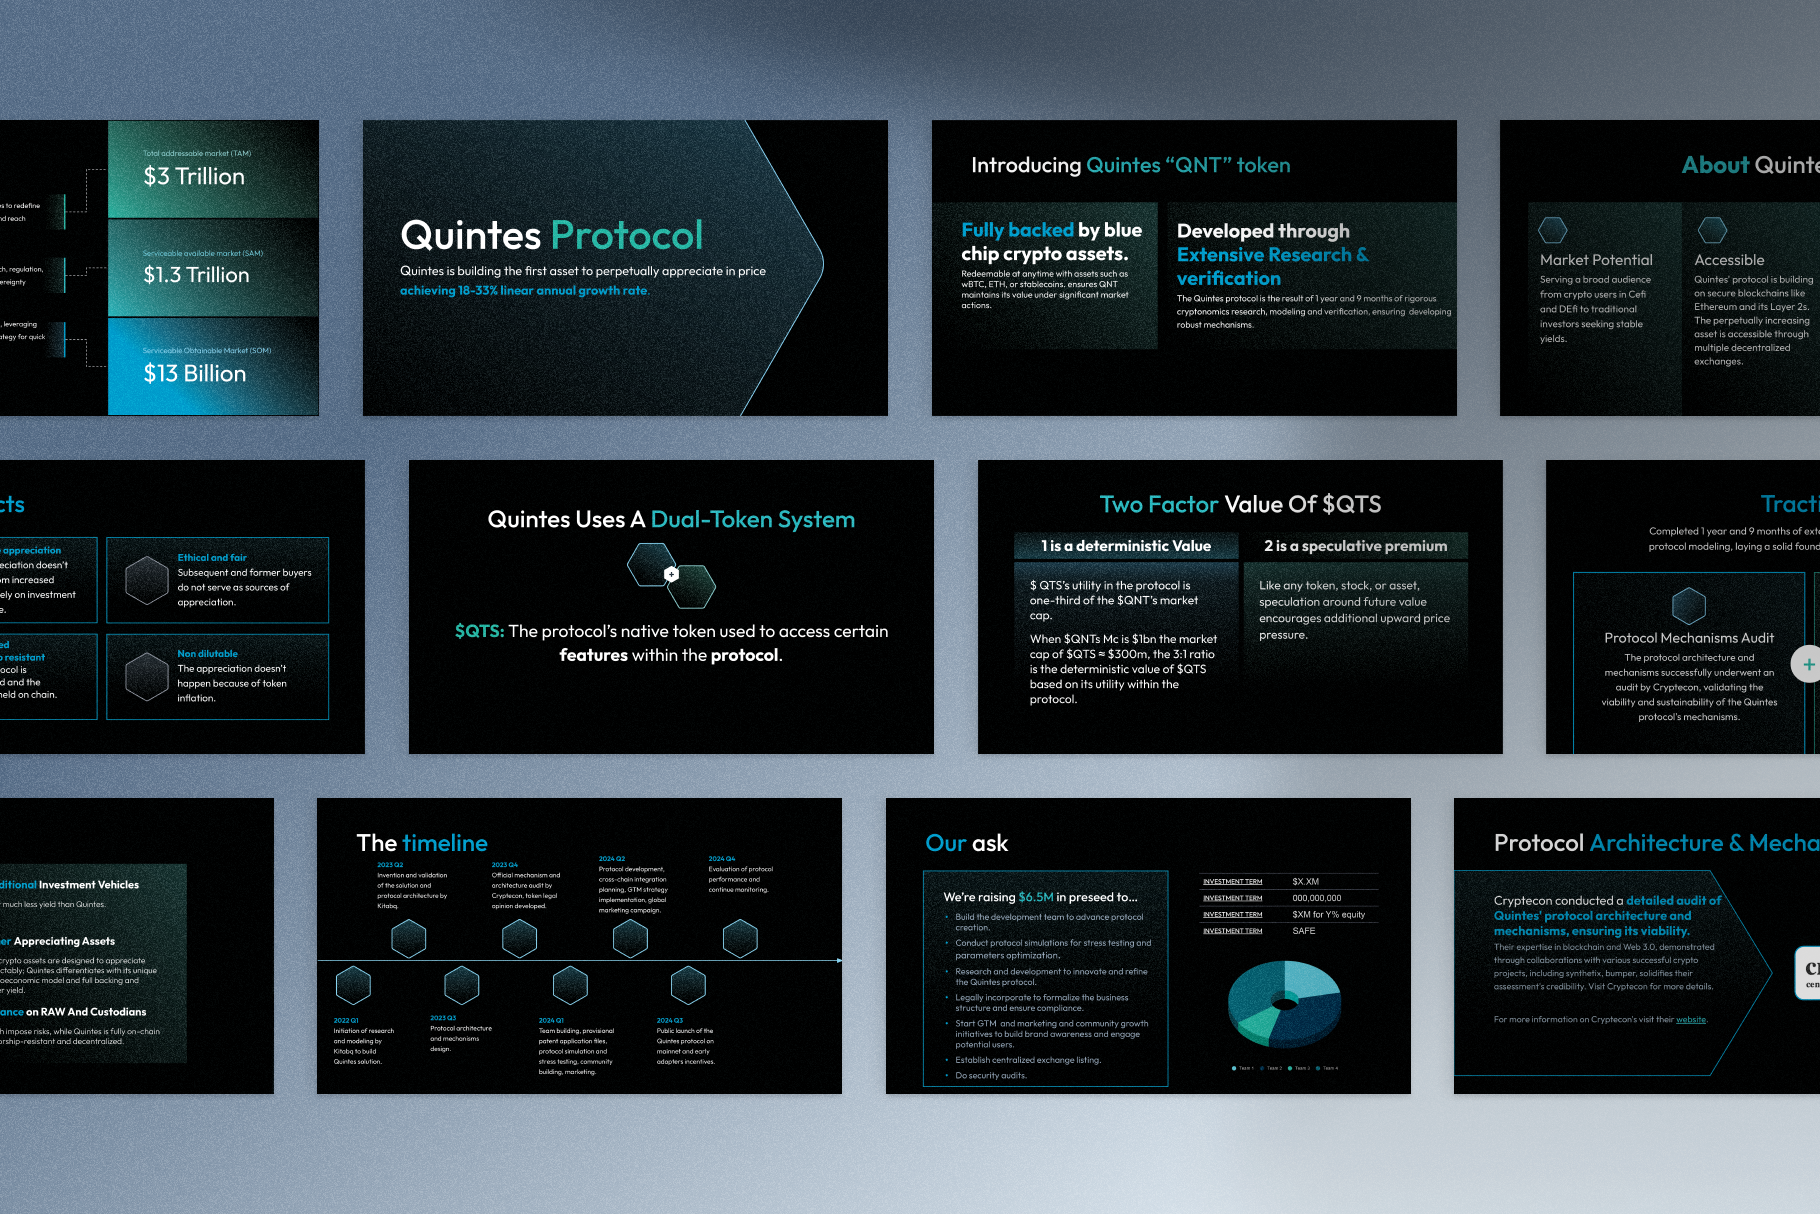 cryptocurrency pitch deck case study for quintes